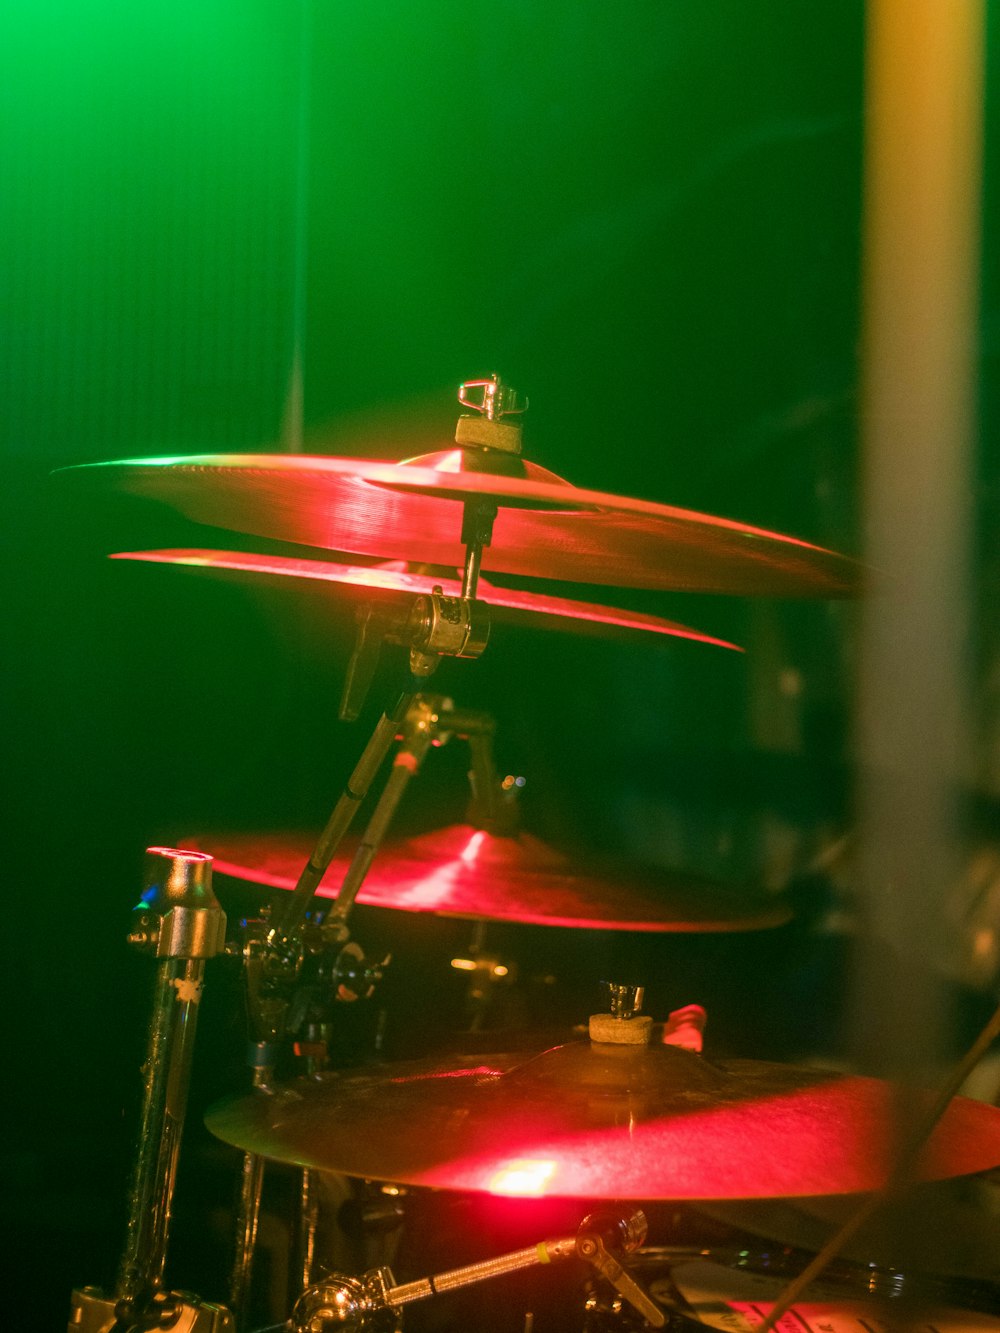 a drum set up in front of a green light